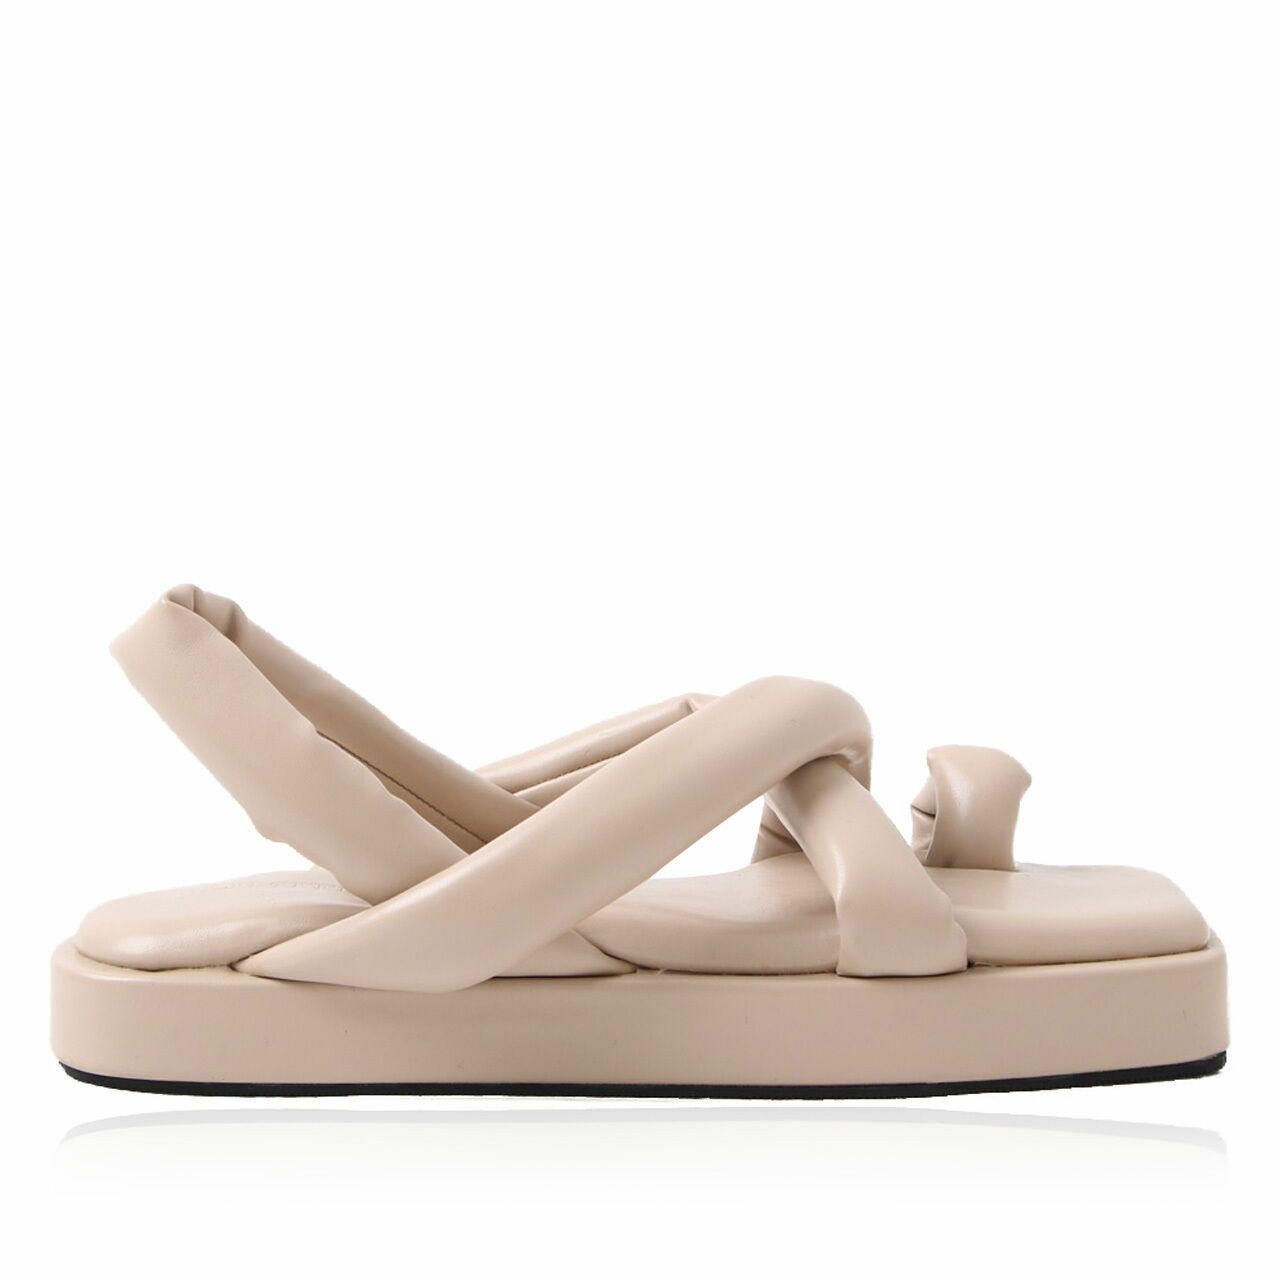 LIMITED Nude Sandals